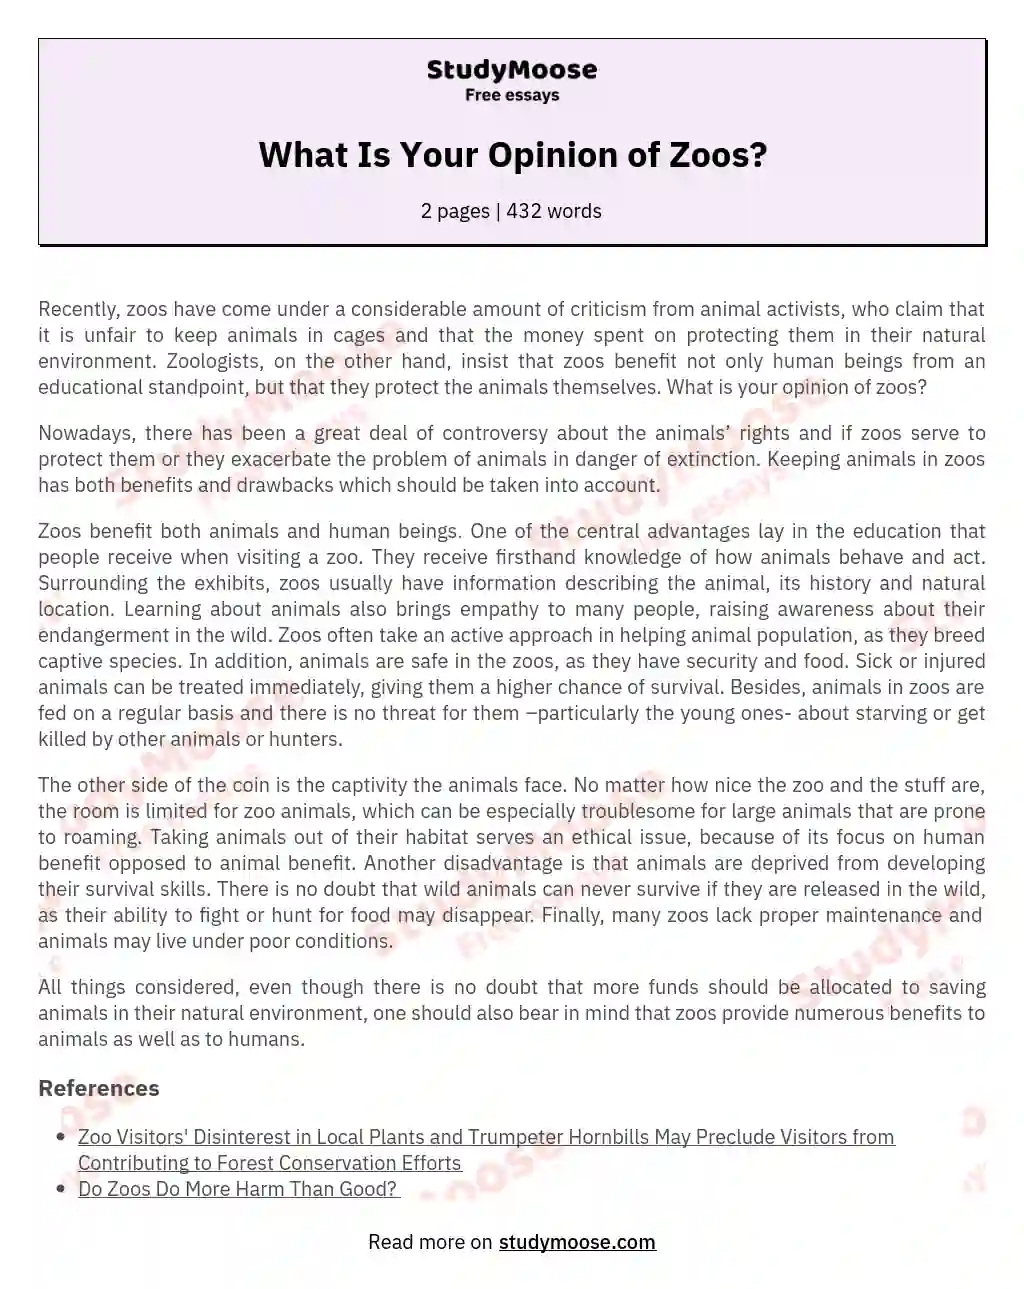 What Is Your Opinion of Zoos? essay